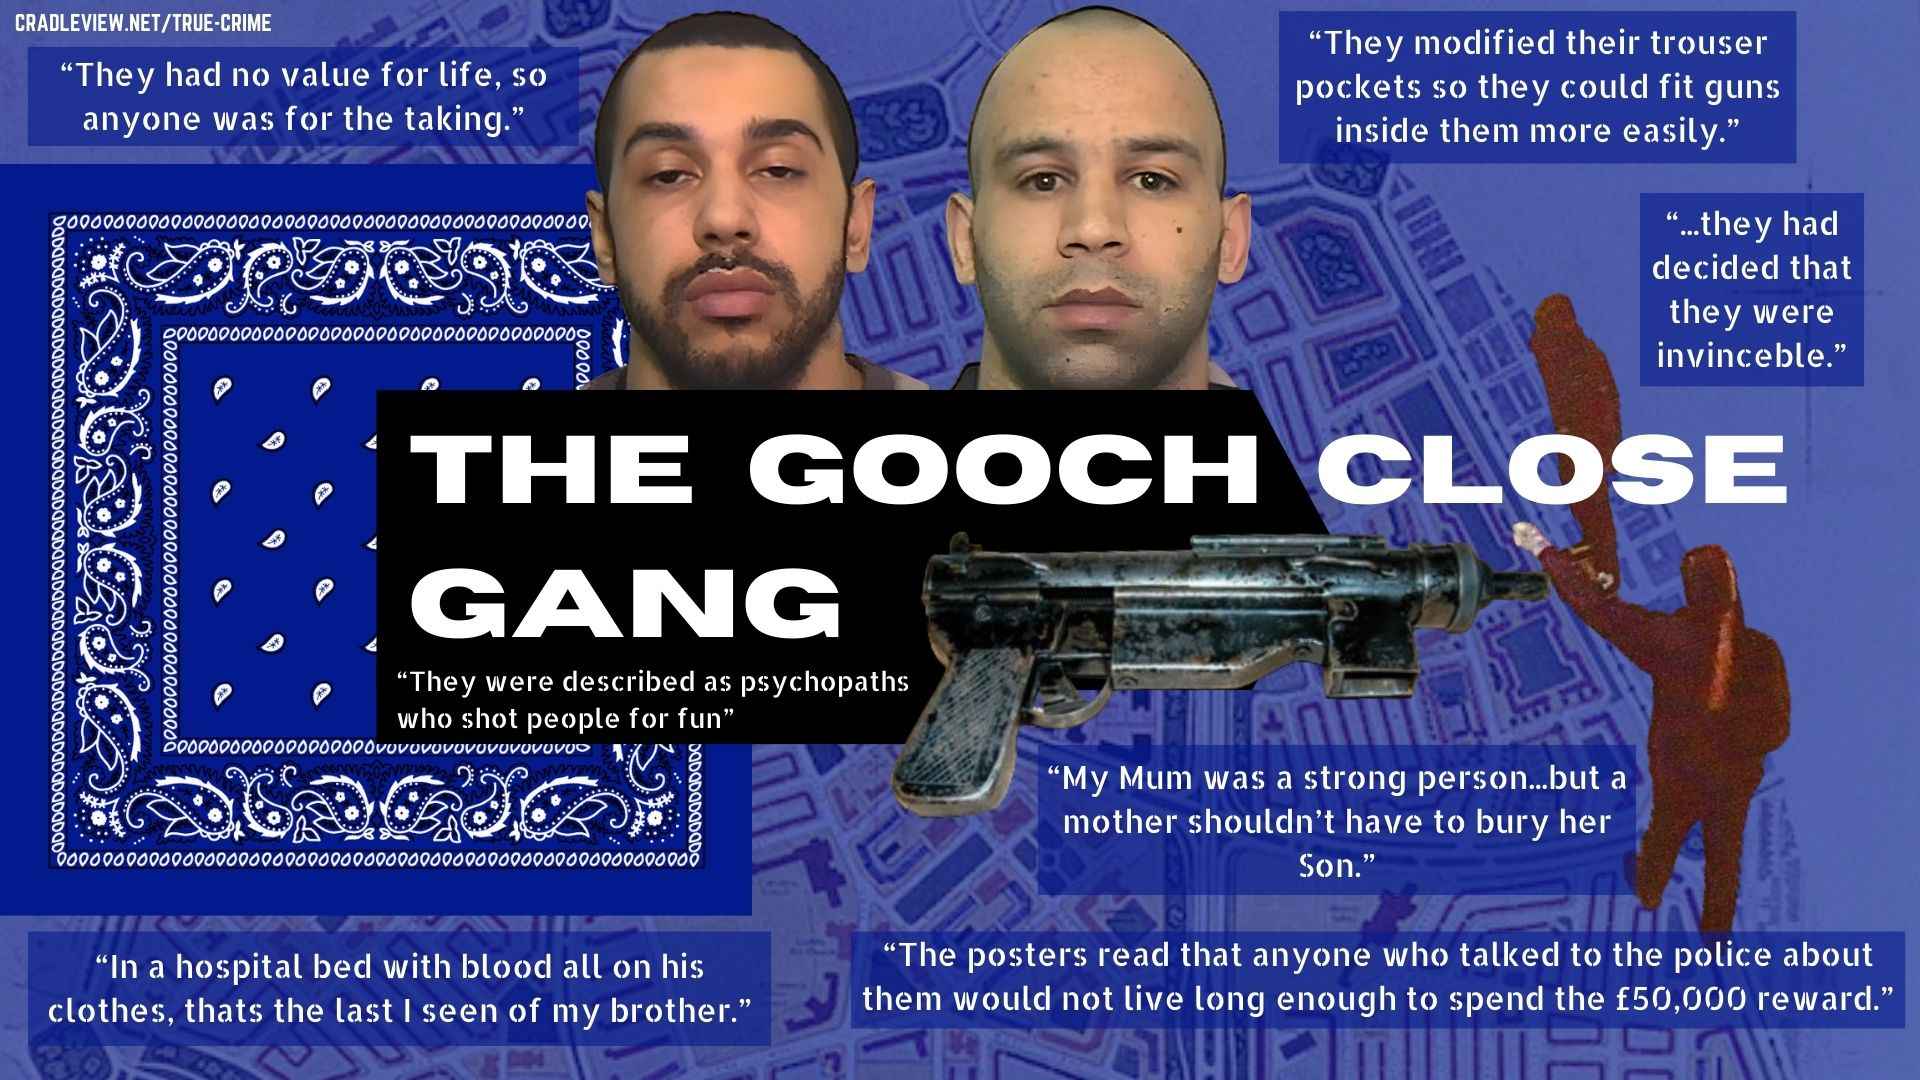 Notorious The Bloody History Of The Gooch Close Gang-Article Featured Image